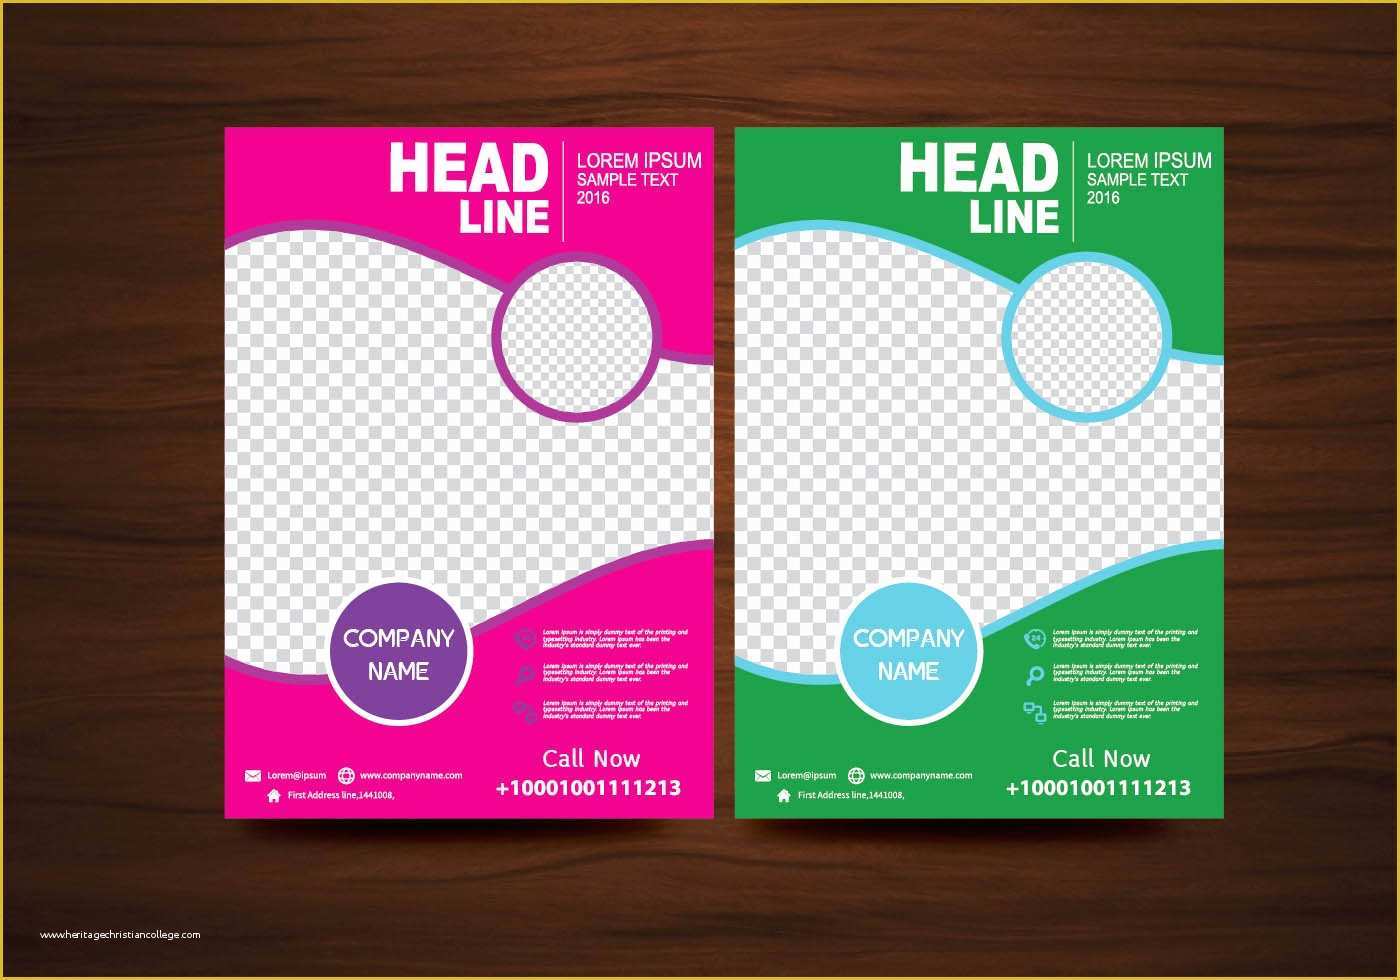 Free Flyer Design Templates Of Vector Brochure Flyer Design Layout Template In A4 Size